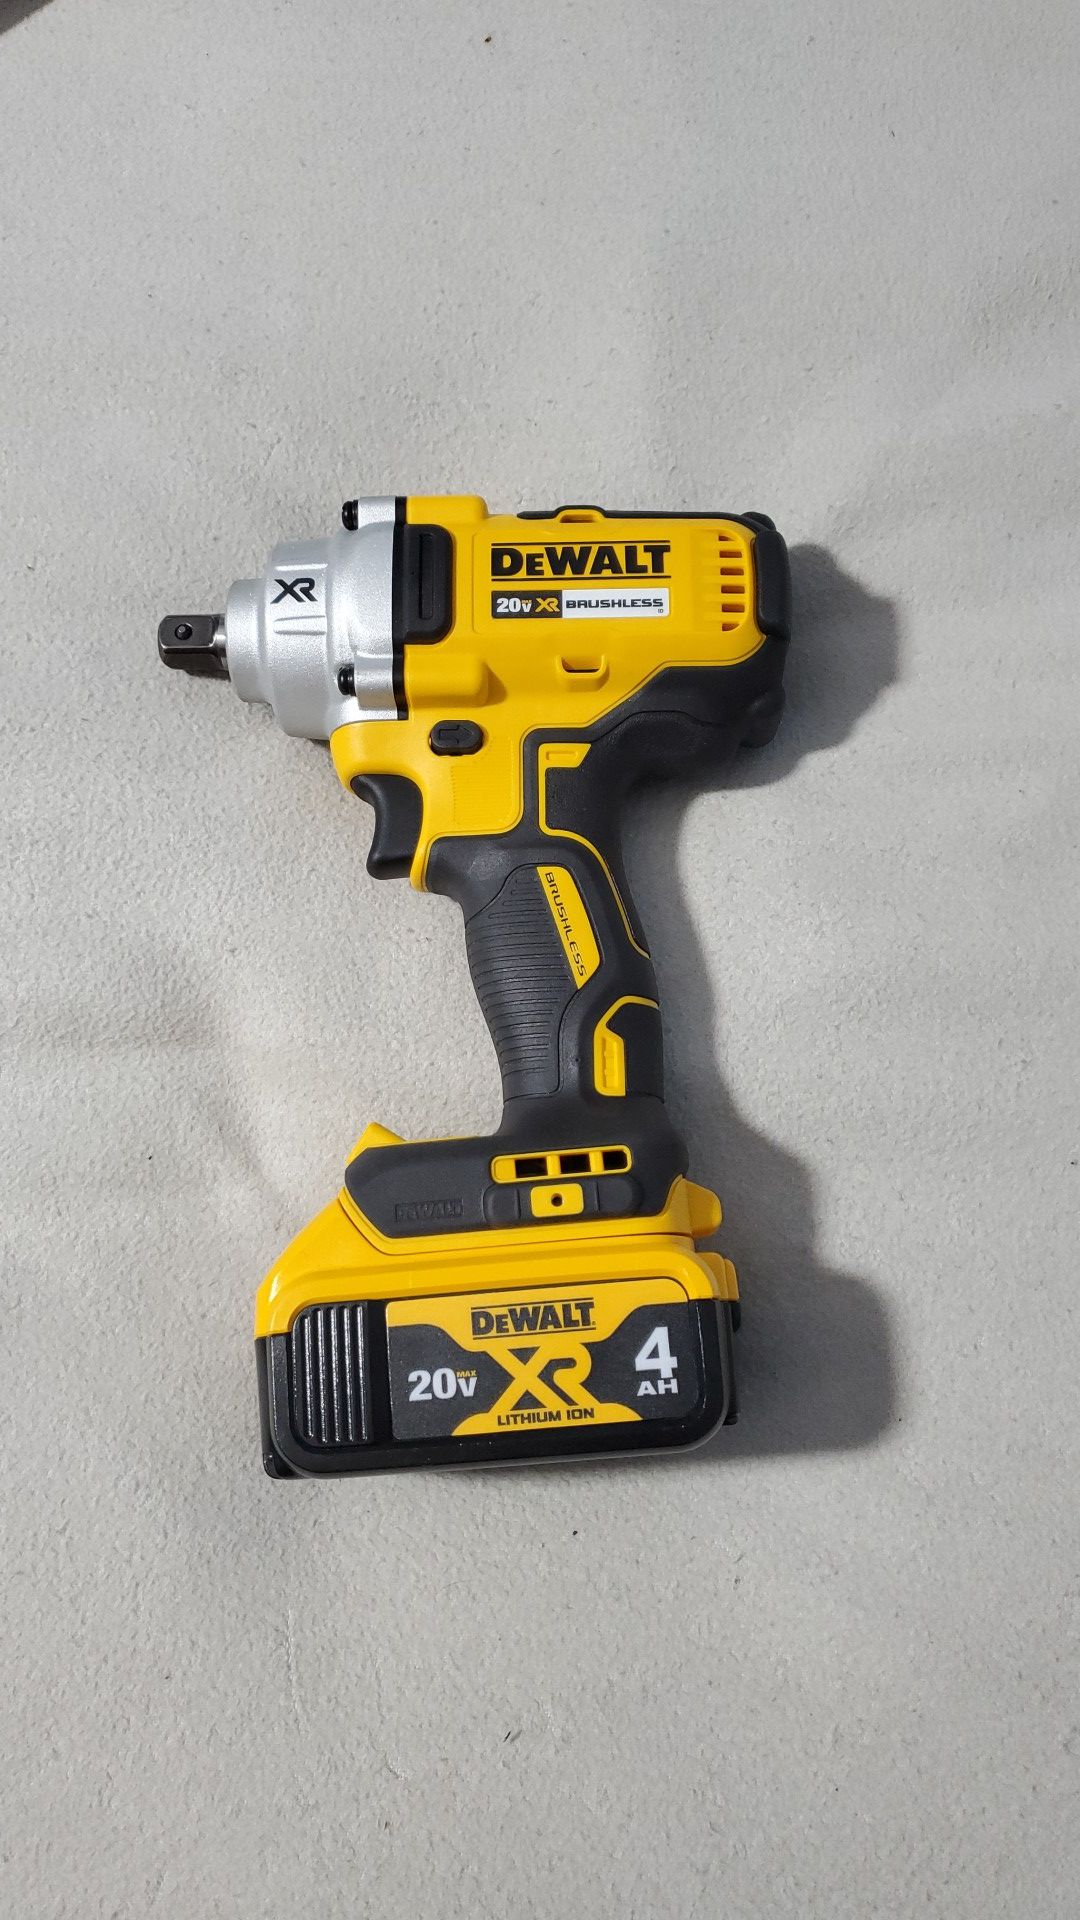 Dewalt 20V Max XR Bueshless 1/2in Impact Wrench. With 2 new 4Ah Batteries. All new unused. Firm